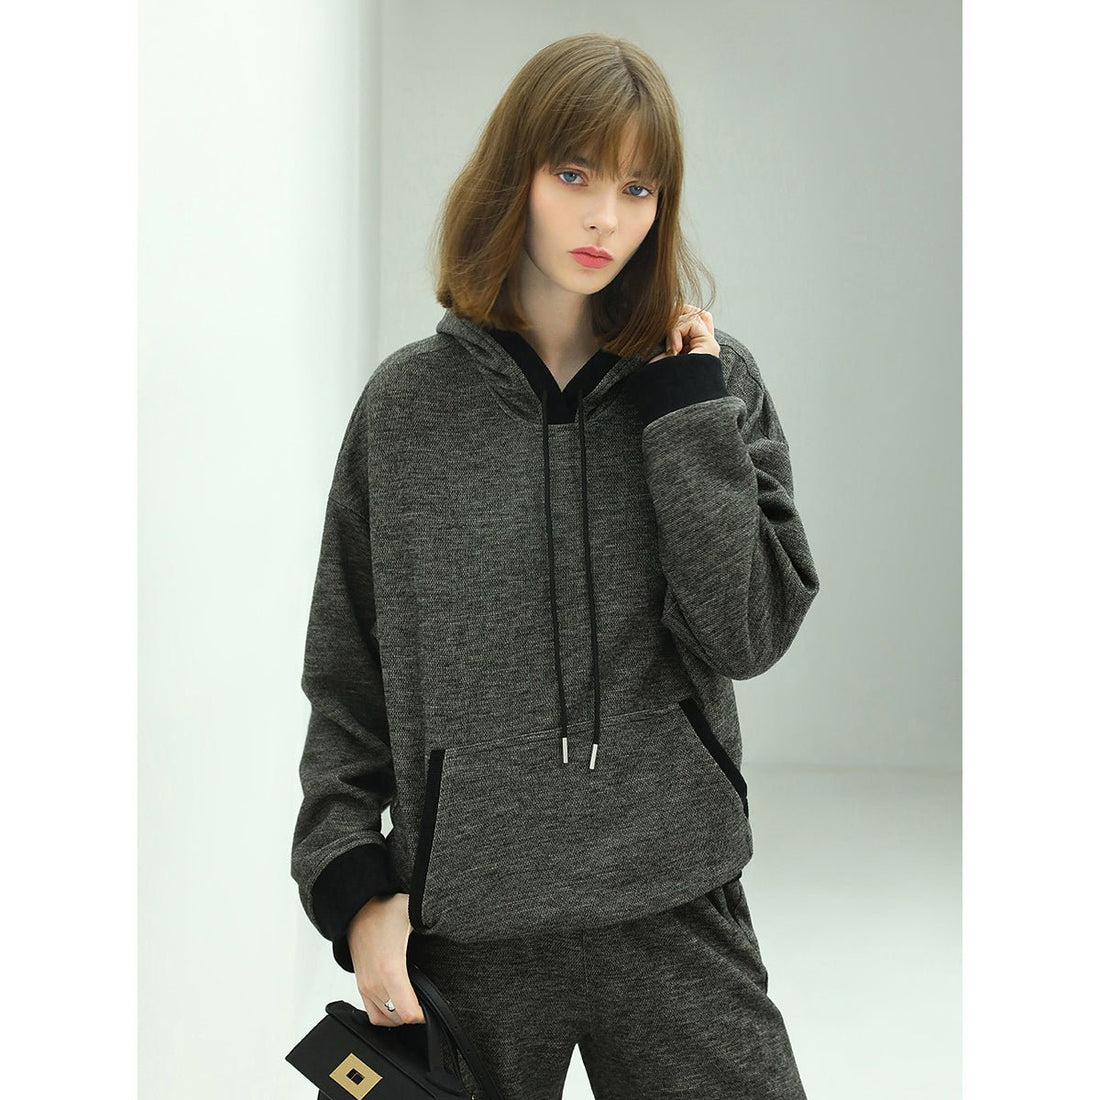 Warm Touch Kangaroo Pocket Knitted Charcoal Hooded Sweater - 0cm